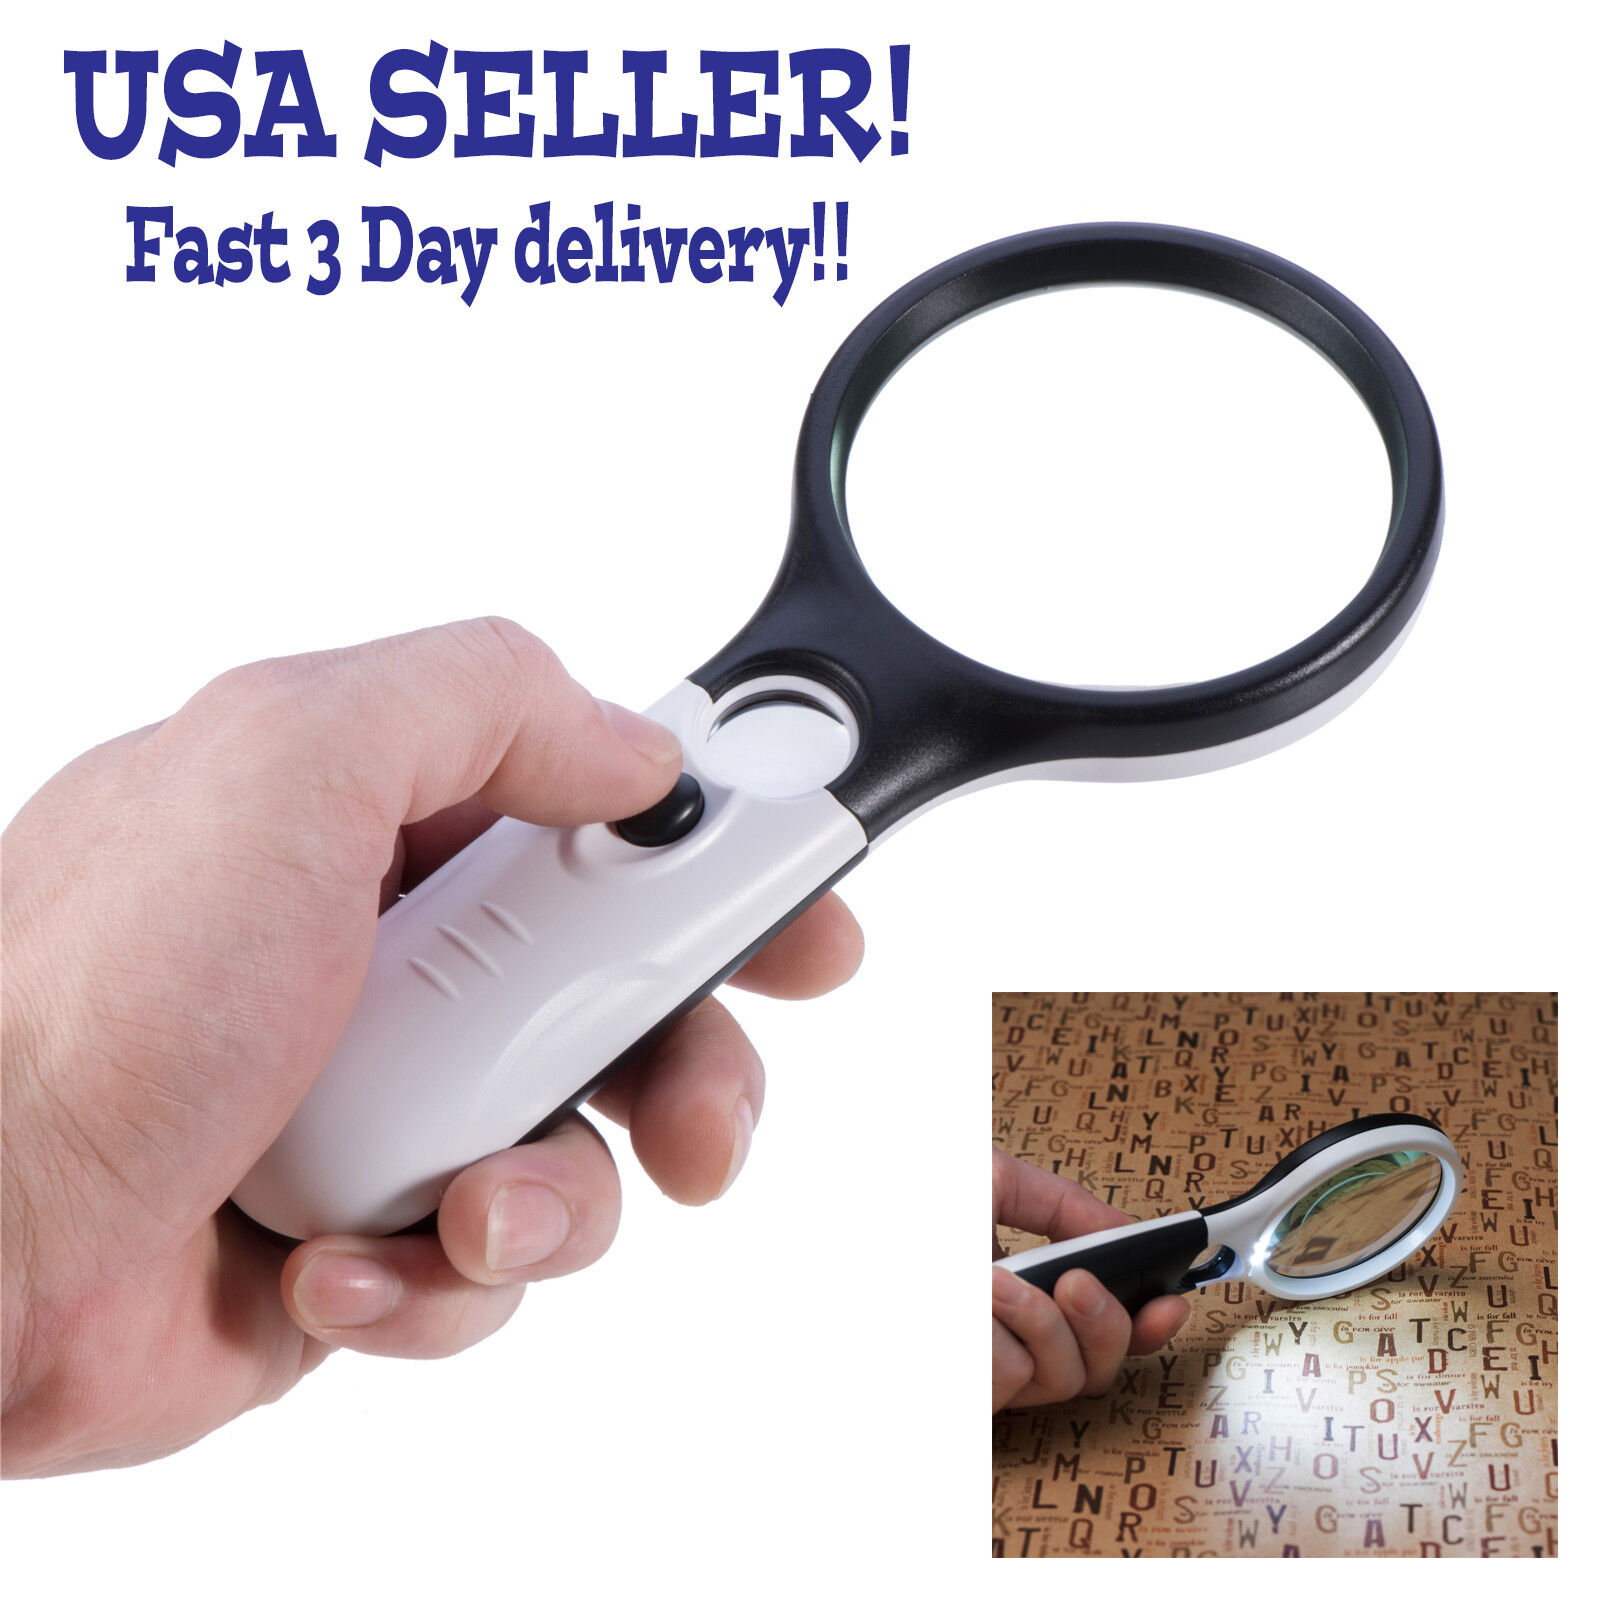 3 LED Light 45X Handheld Magnifier Reading Magnifying Glass Lens Jewelry Loupe Valuebuy Battery LED Handheld Magnifier